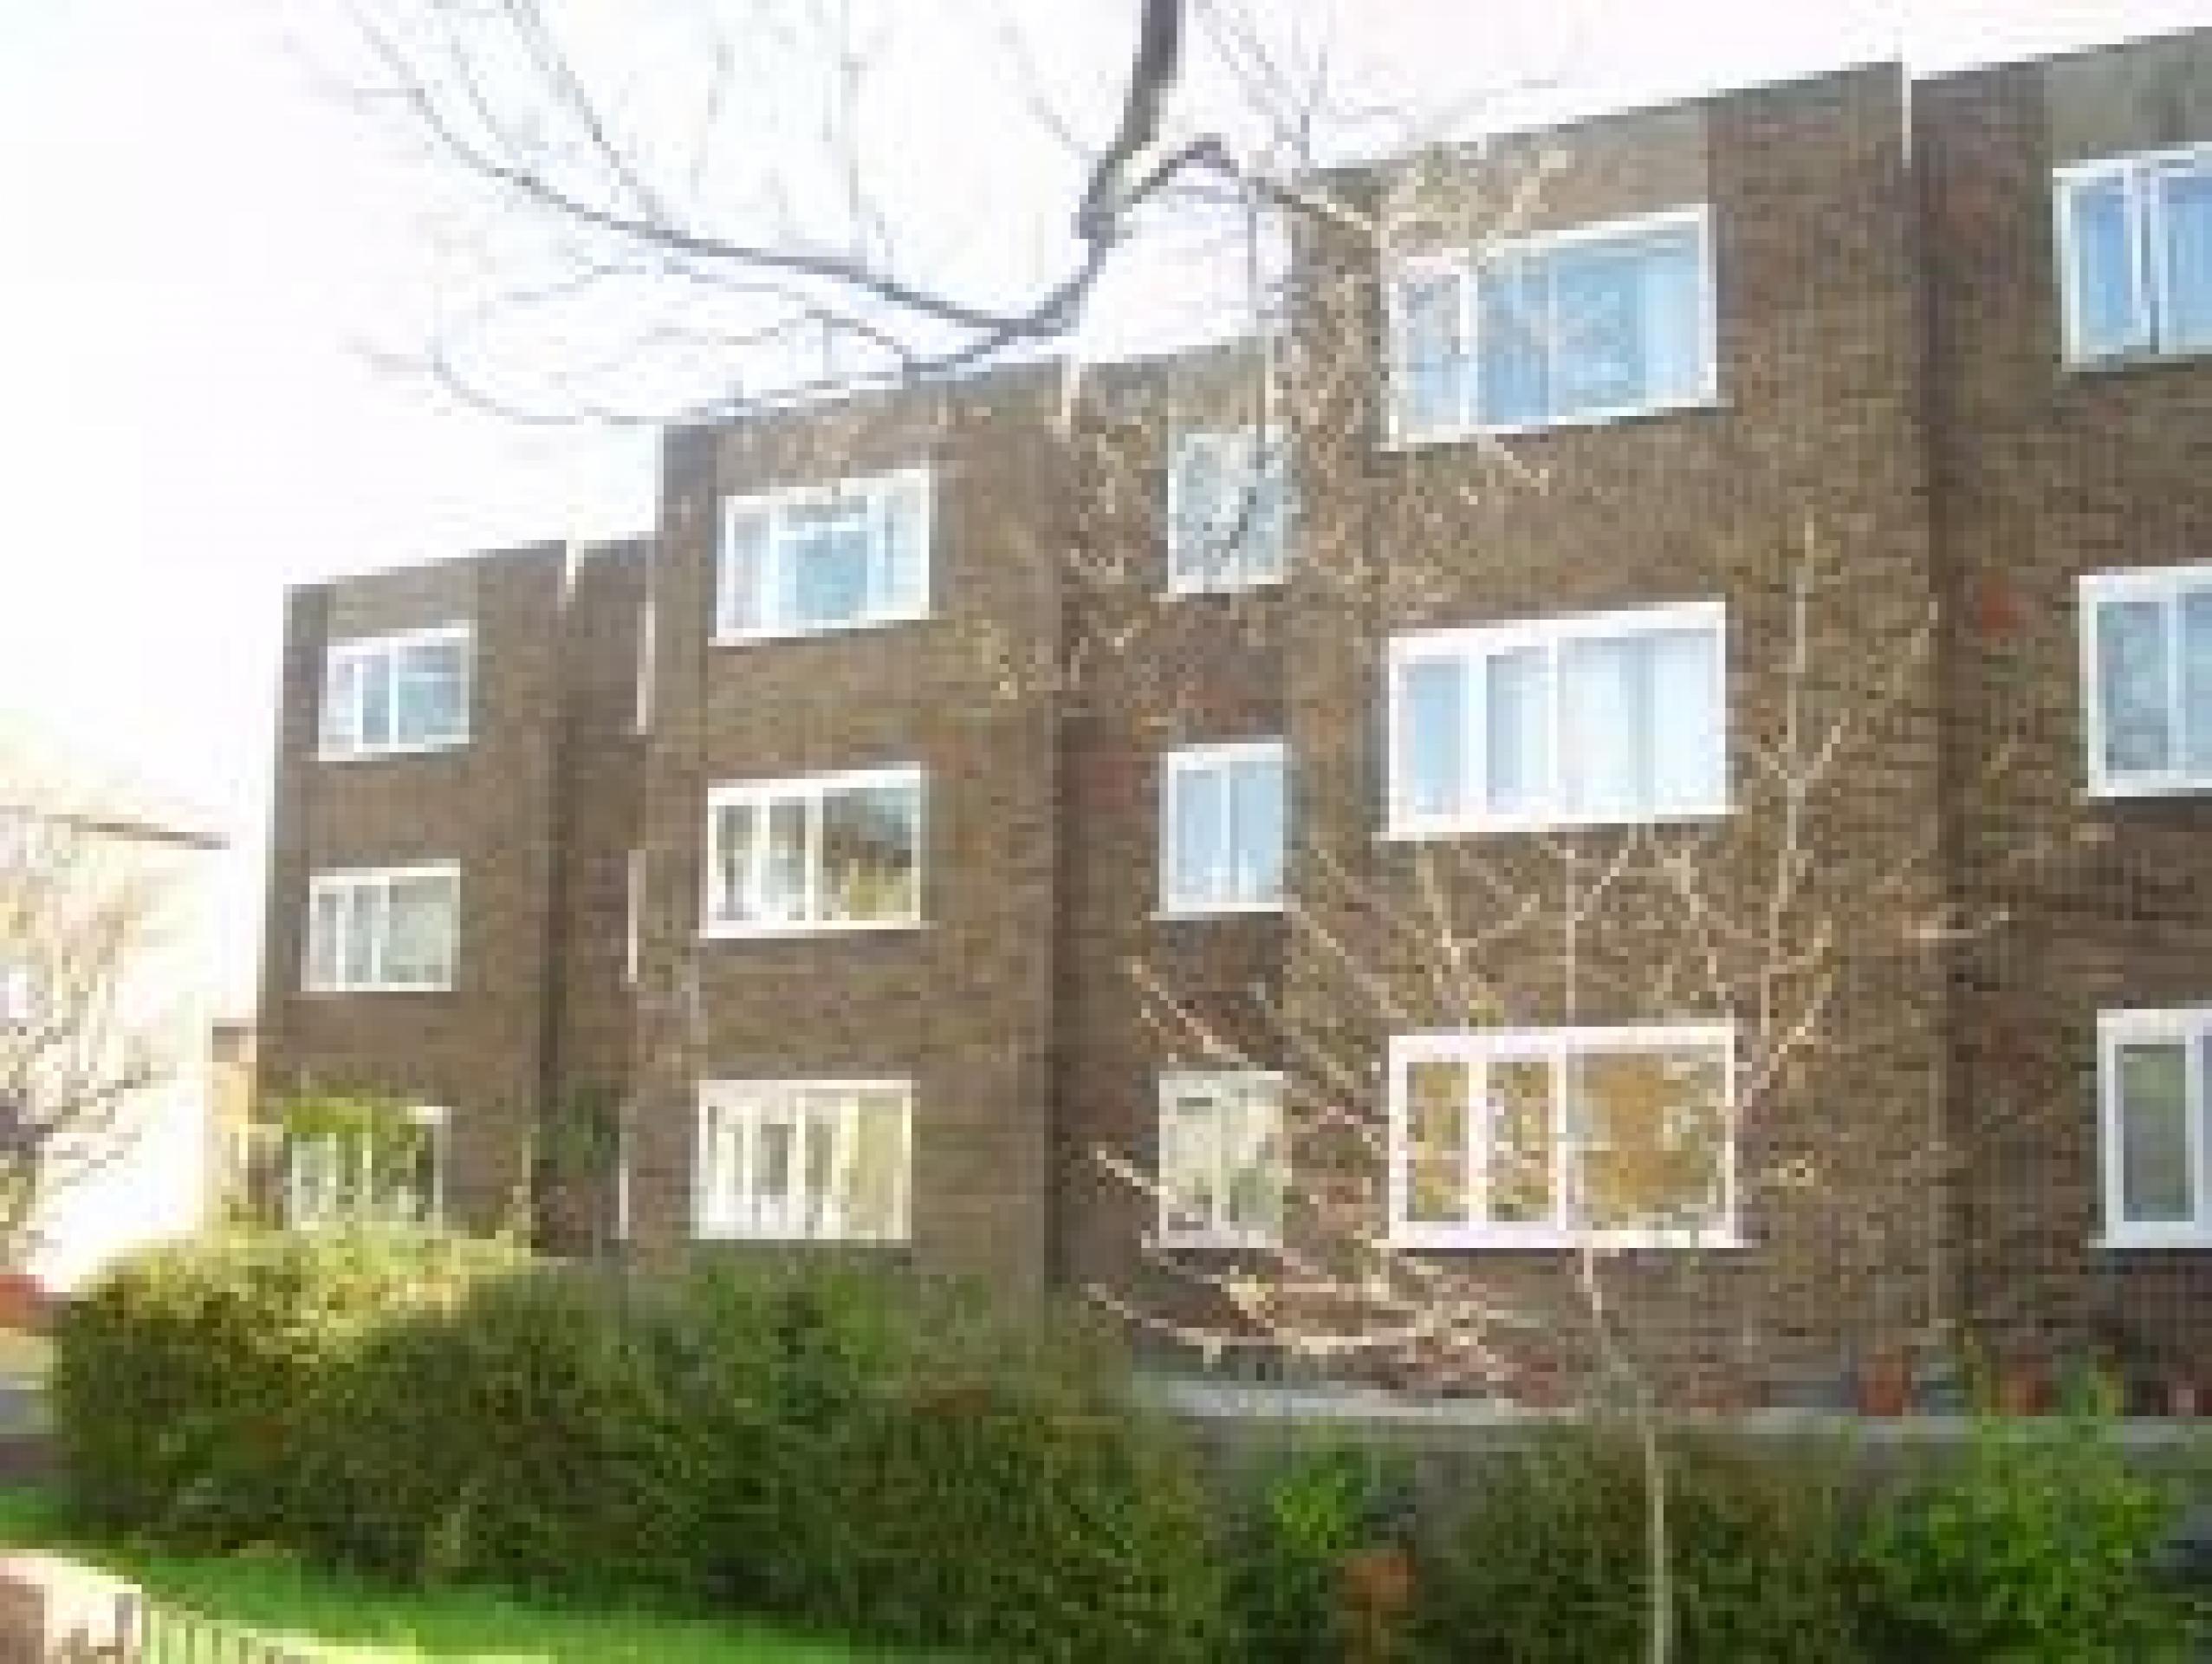 			VIEWINGS RECOMMENDED, 2 Bedroom, 1 bath, 1 reception Flat			 Ward Road, TUFNELL PARK N19 N19